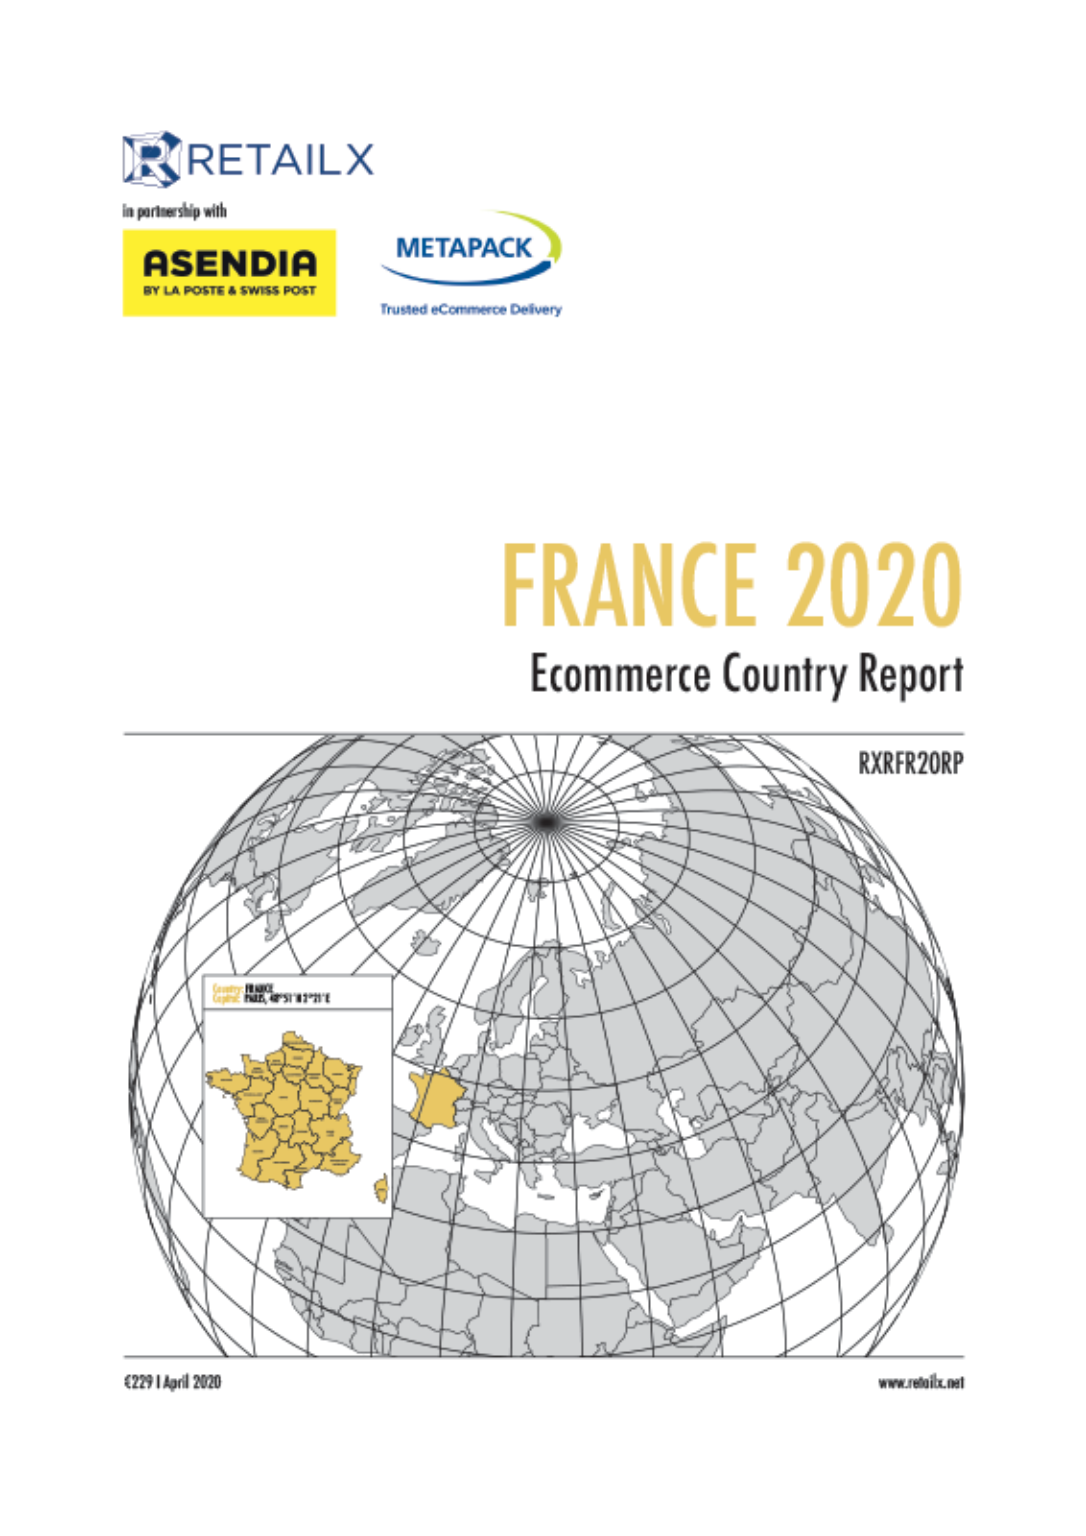 France 2020 Ecommerce Country Report_cover